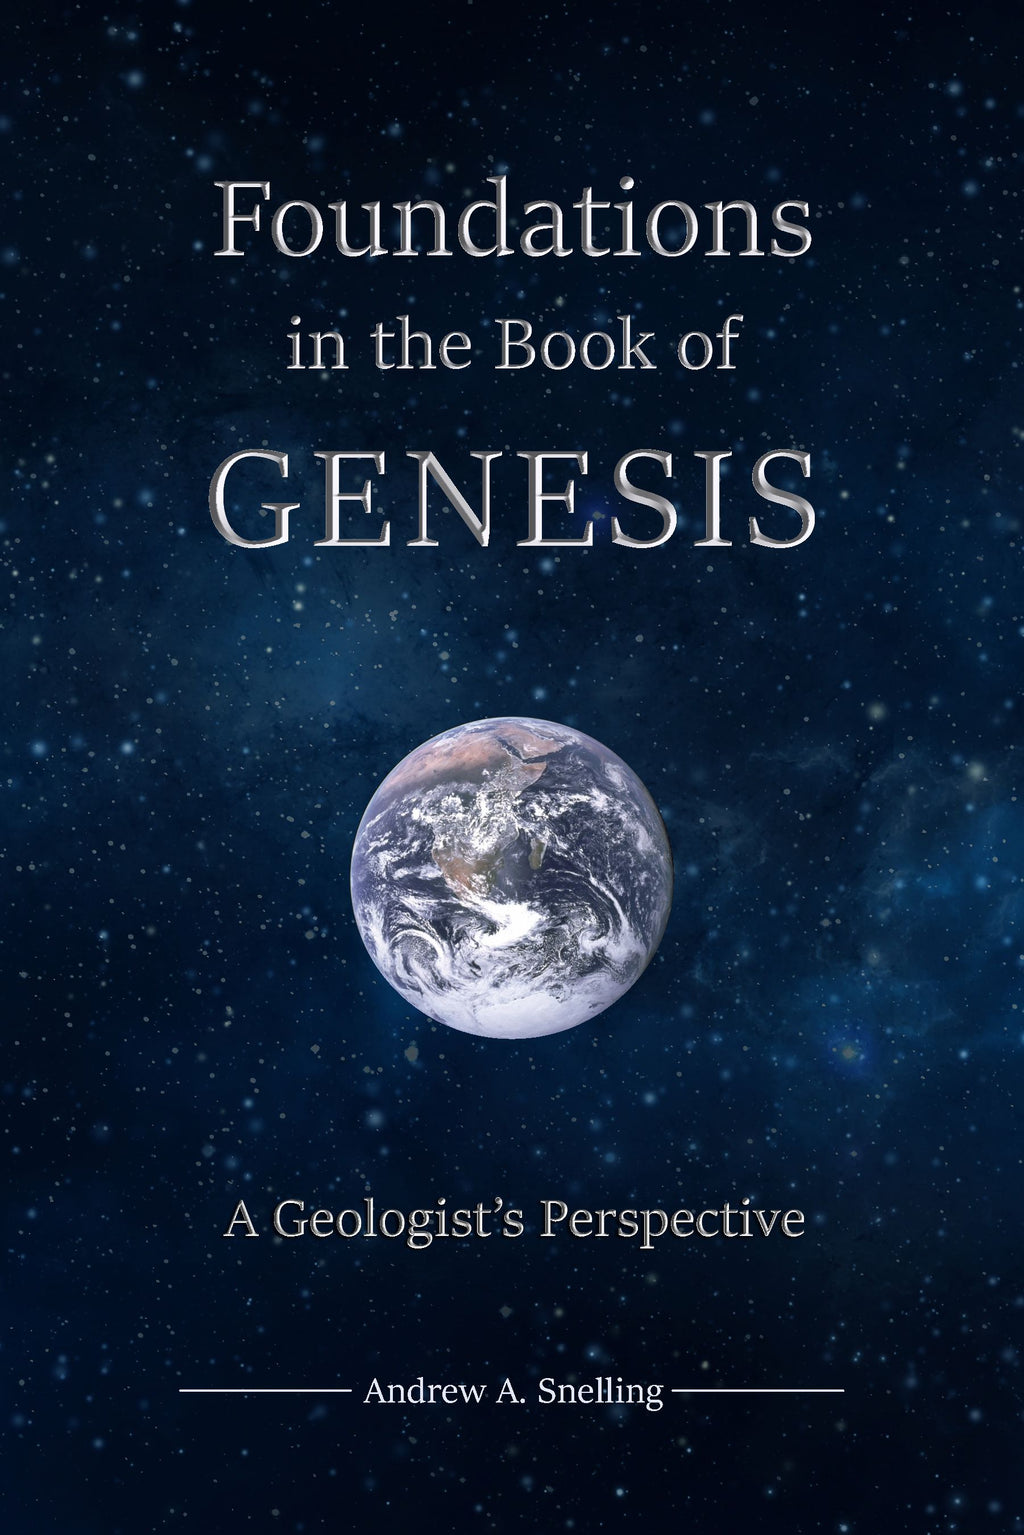 Foundations in the Book of Genesis